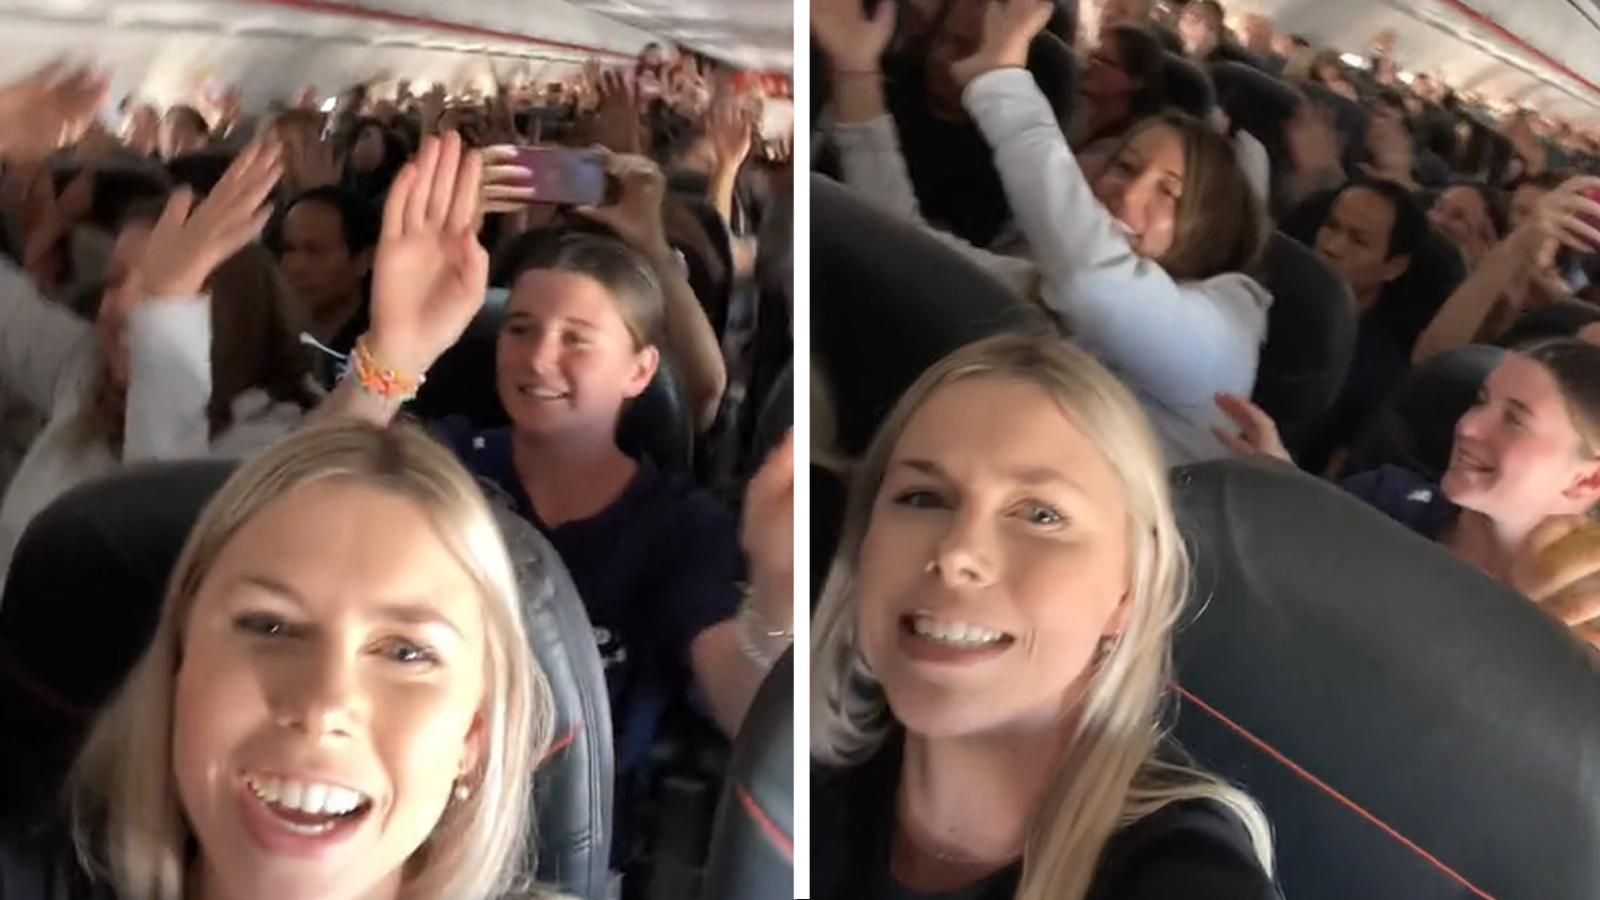 Plane full of Swifties divides the internet with mass Taylor Swift sing-along